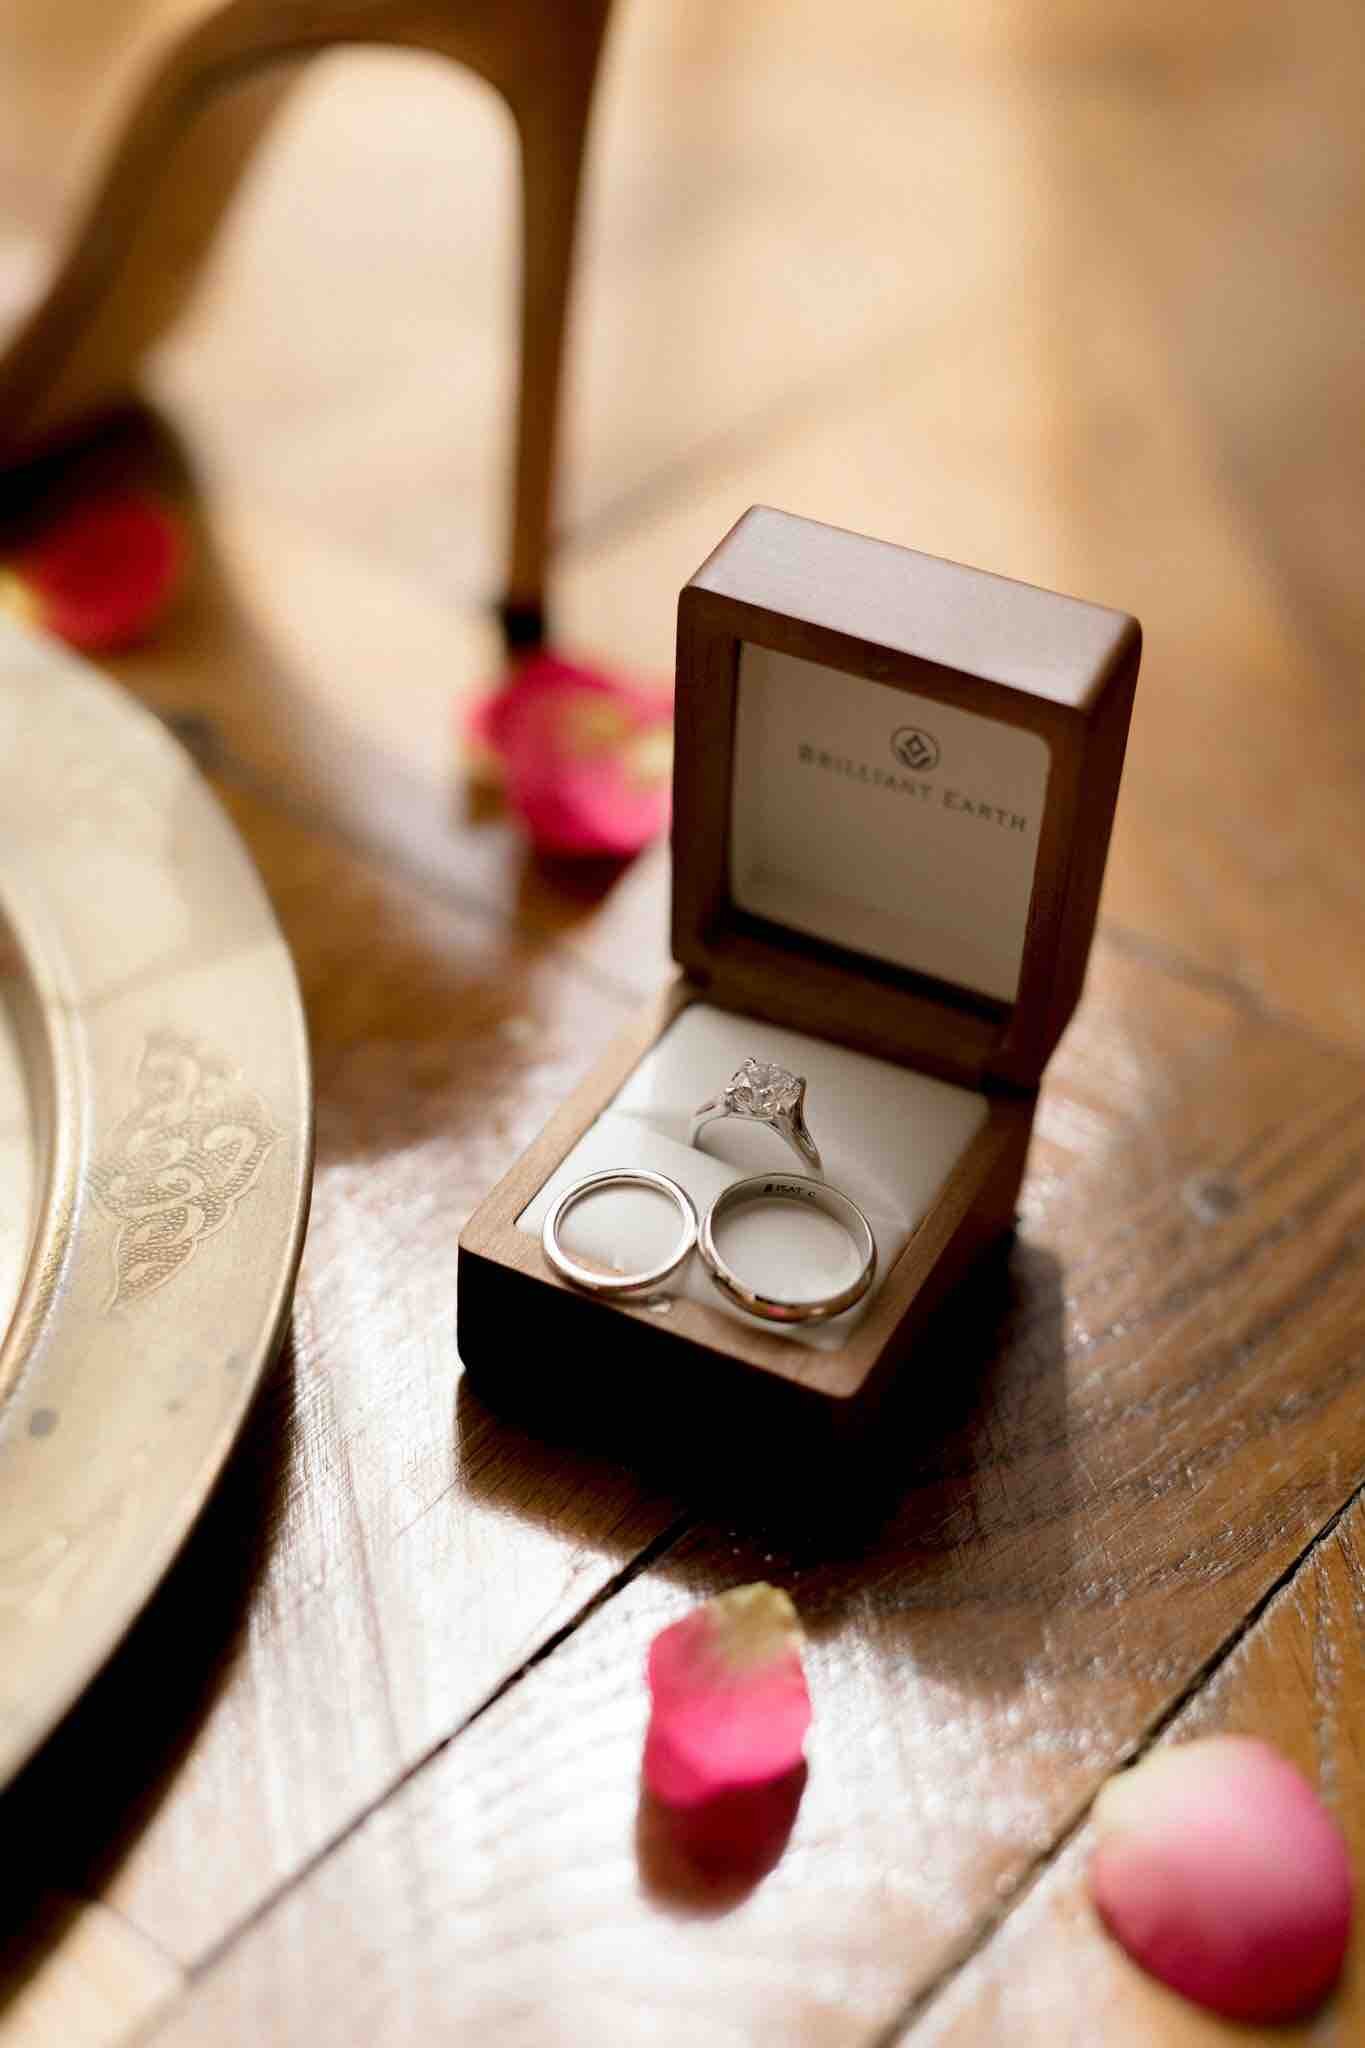 Two wedding rings side-by-side in a box on a wooden table with rose petals and a wedding shoe.